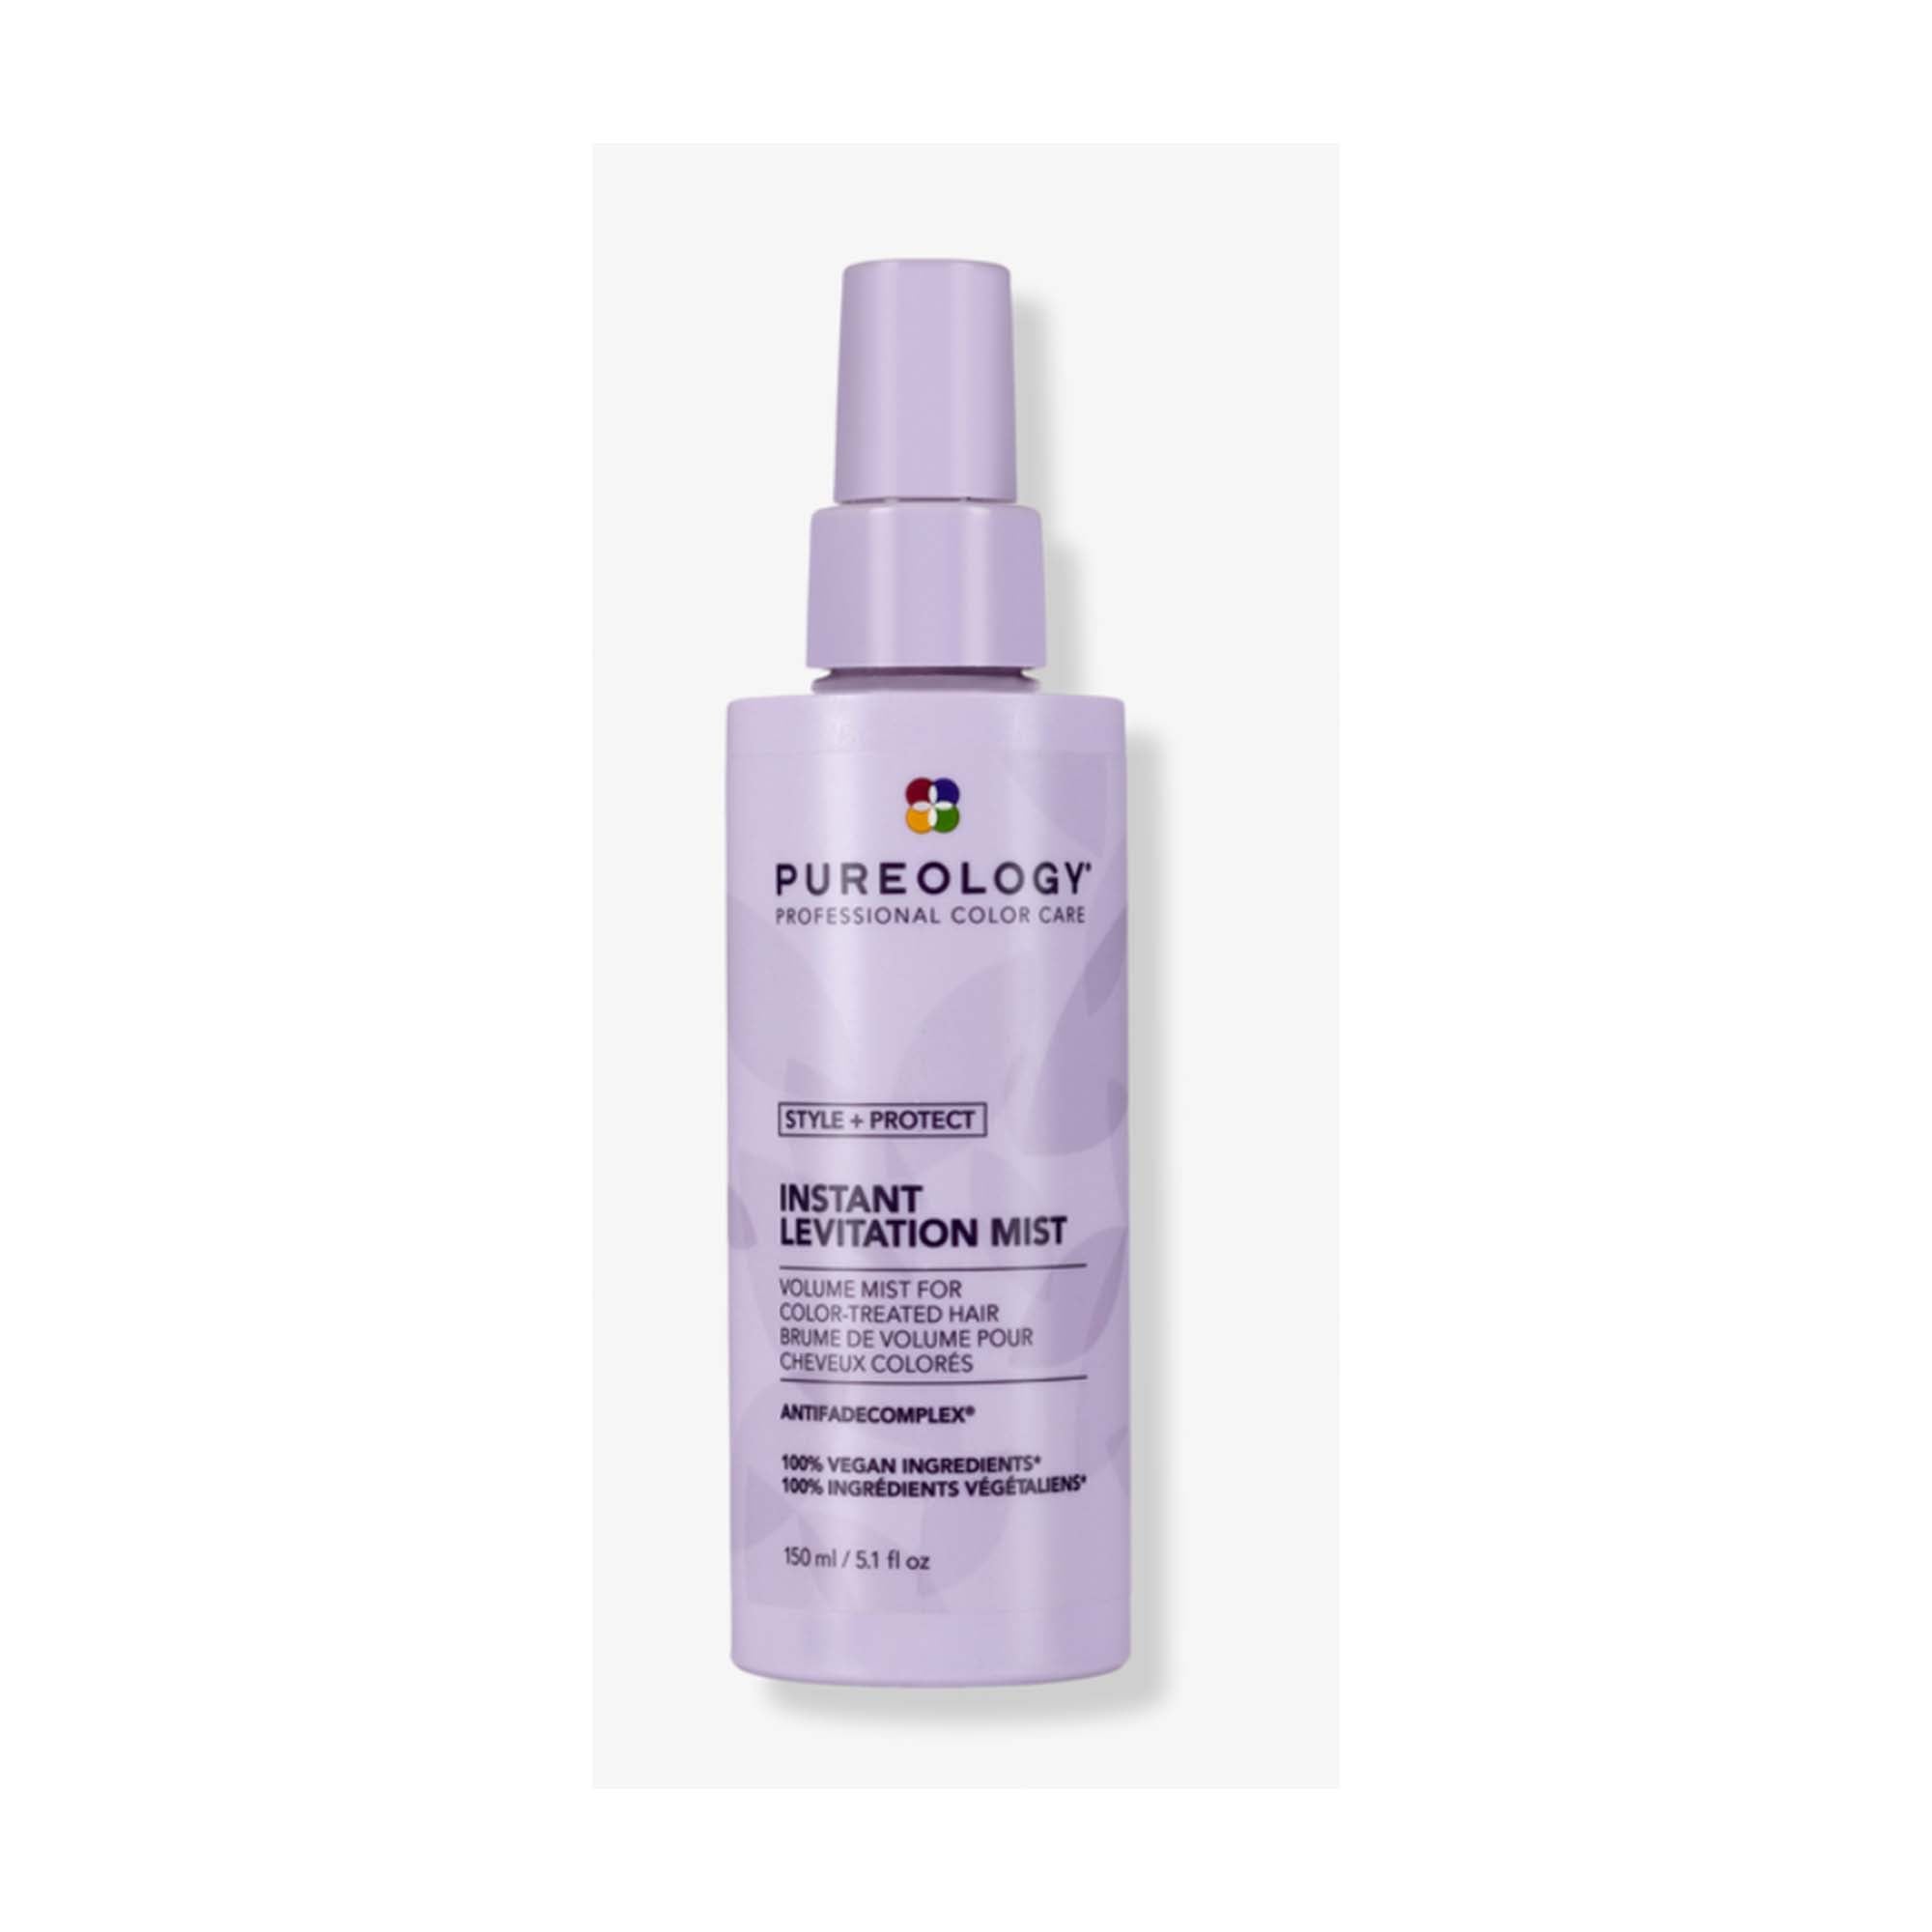 Pureology Style+Protect Instant Levitation Mist